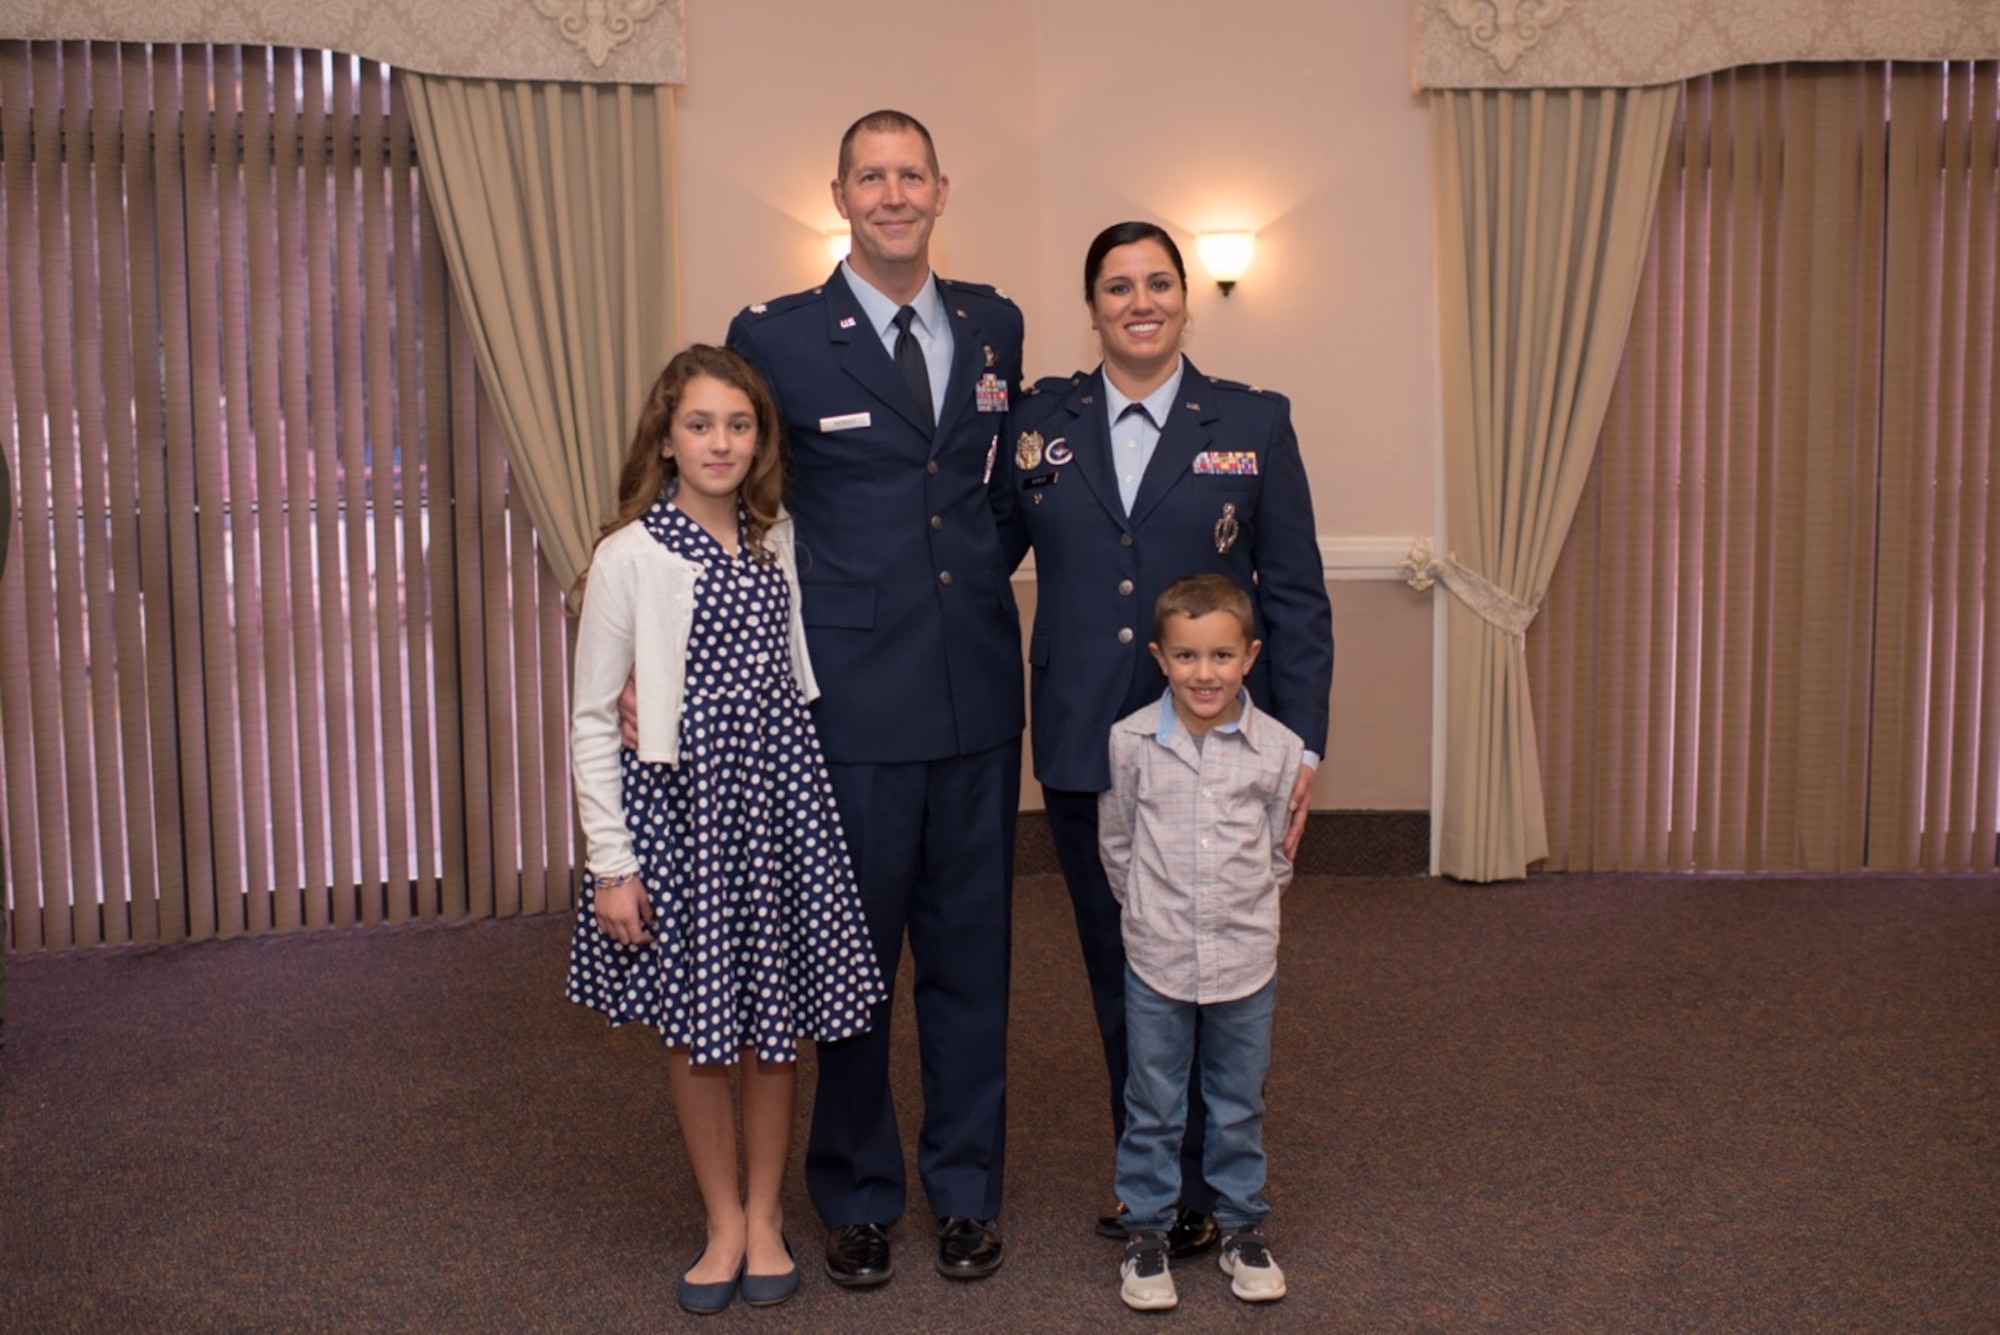 According to the 2018 Demographics Report published by the Department of Defense, 10.9% of active duty Air Force members (enlisted and officer) are in dual-military marriages, meaning an active duty Airman is married to another active duty or reserve Airman. In some ways, dual-military life can be compared to a normal working couple’s relationship, but it comes with its own unique set of opportunities and challenges.